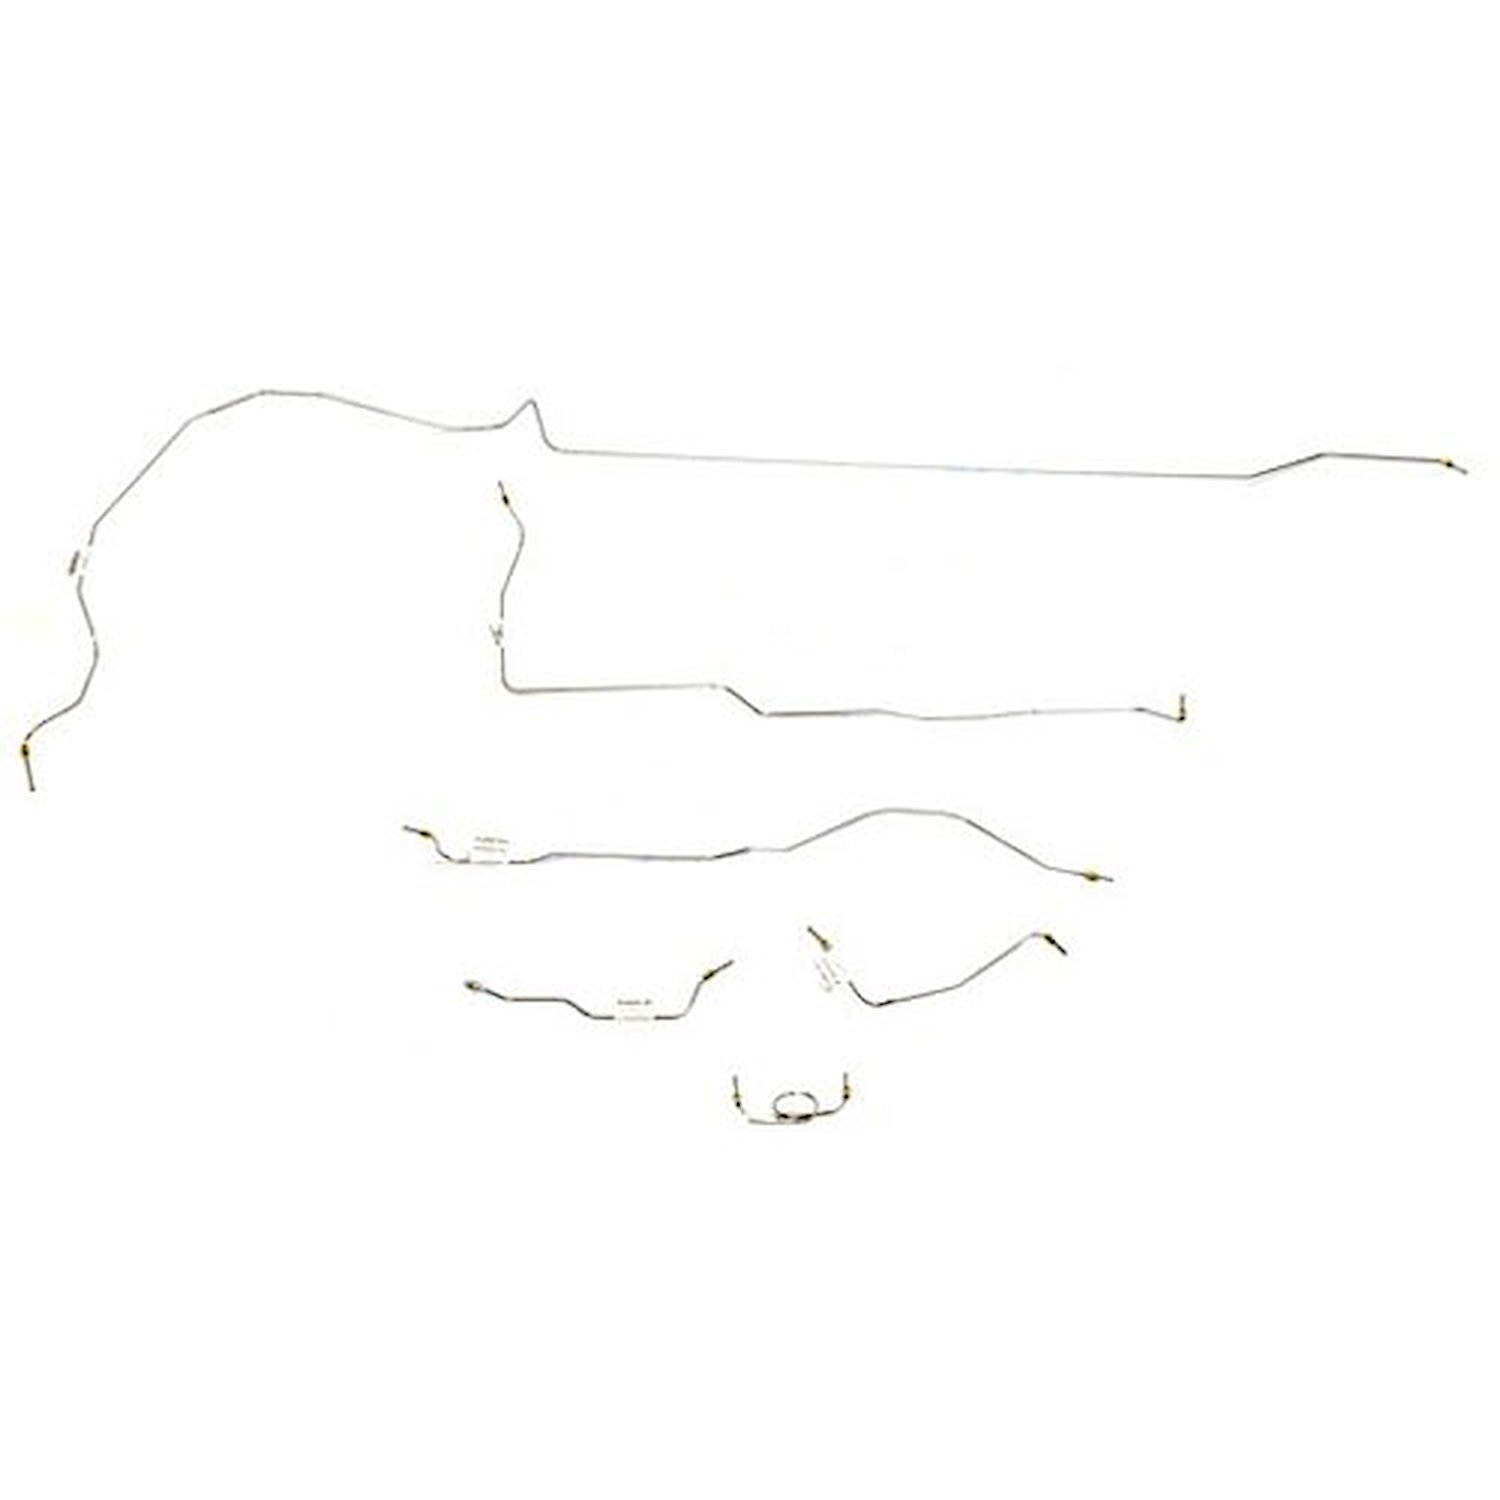 Complete Brake Line Kit 1964-1965 Ford Mustang V8 6 Pieces